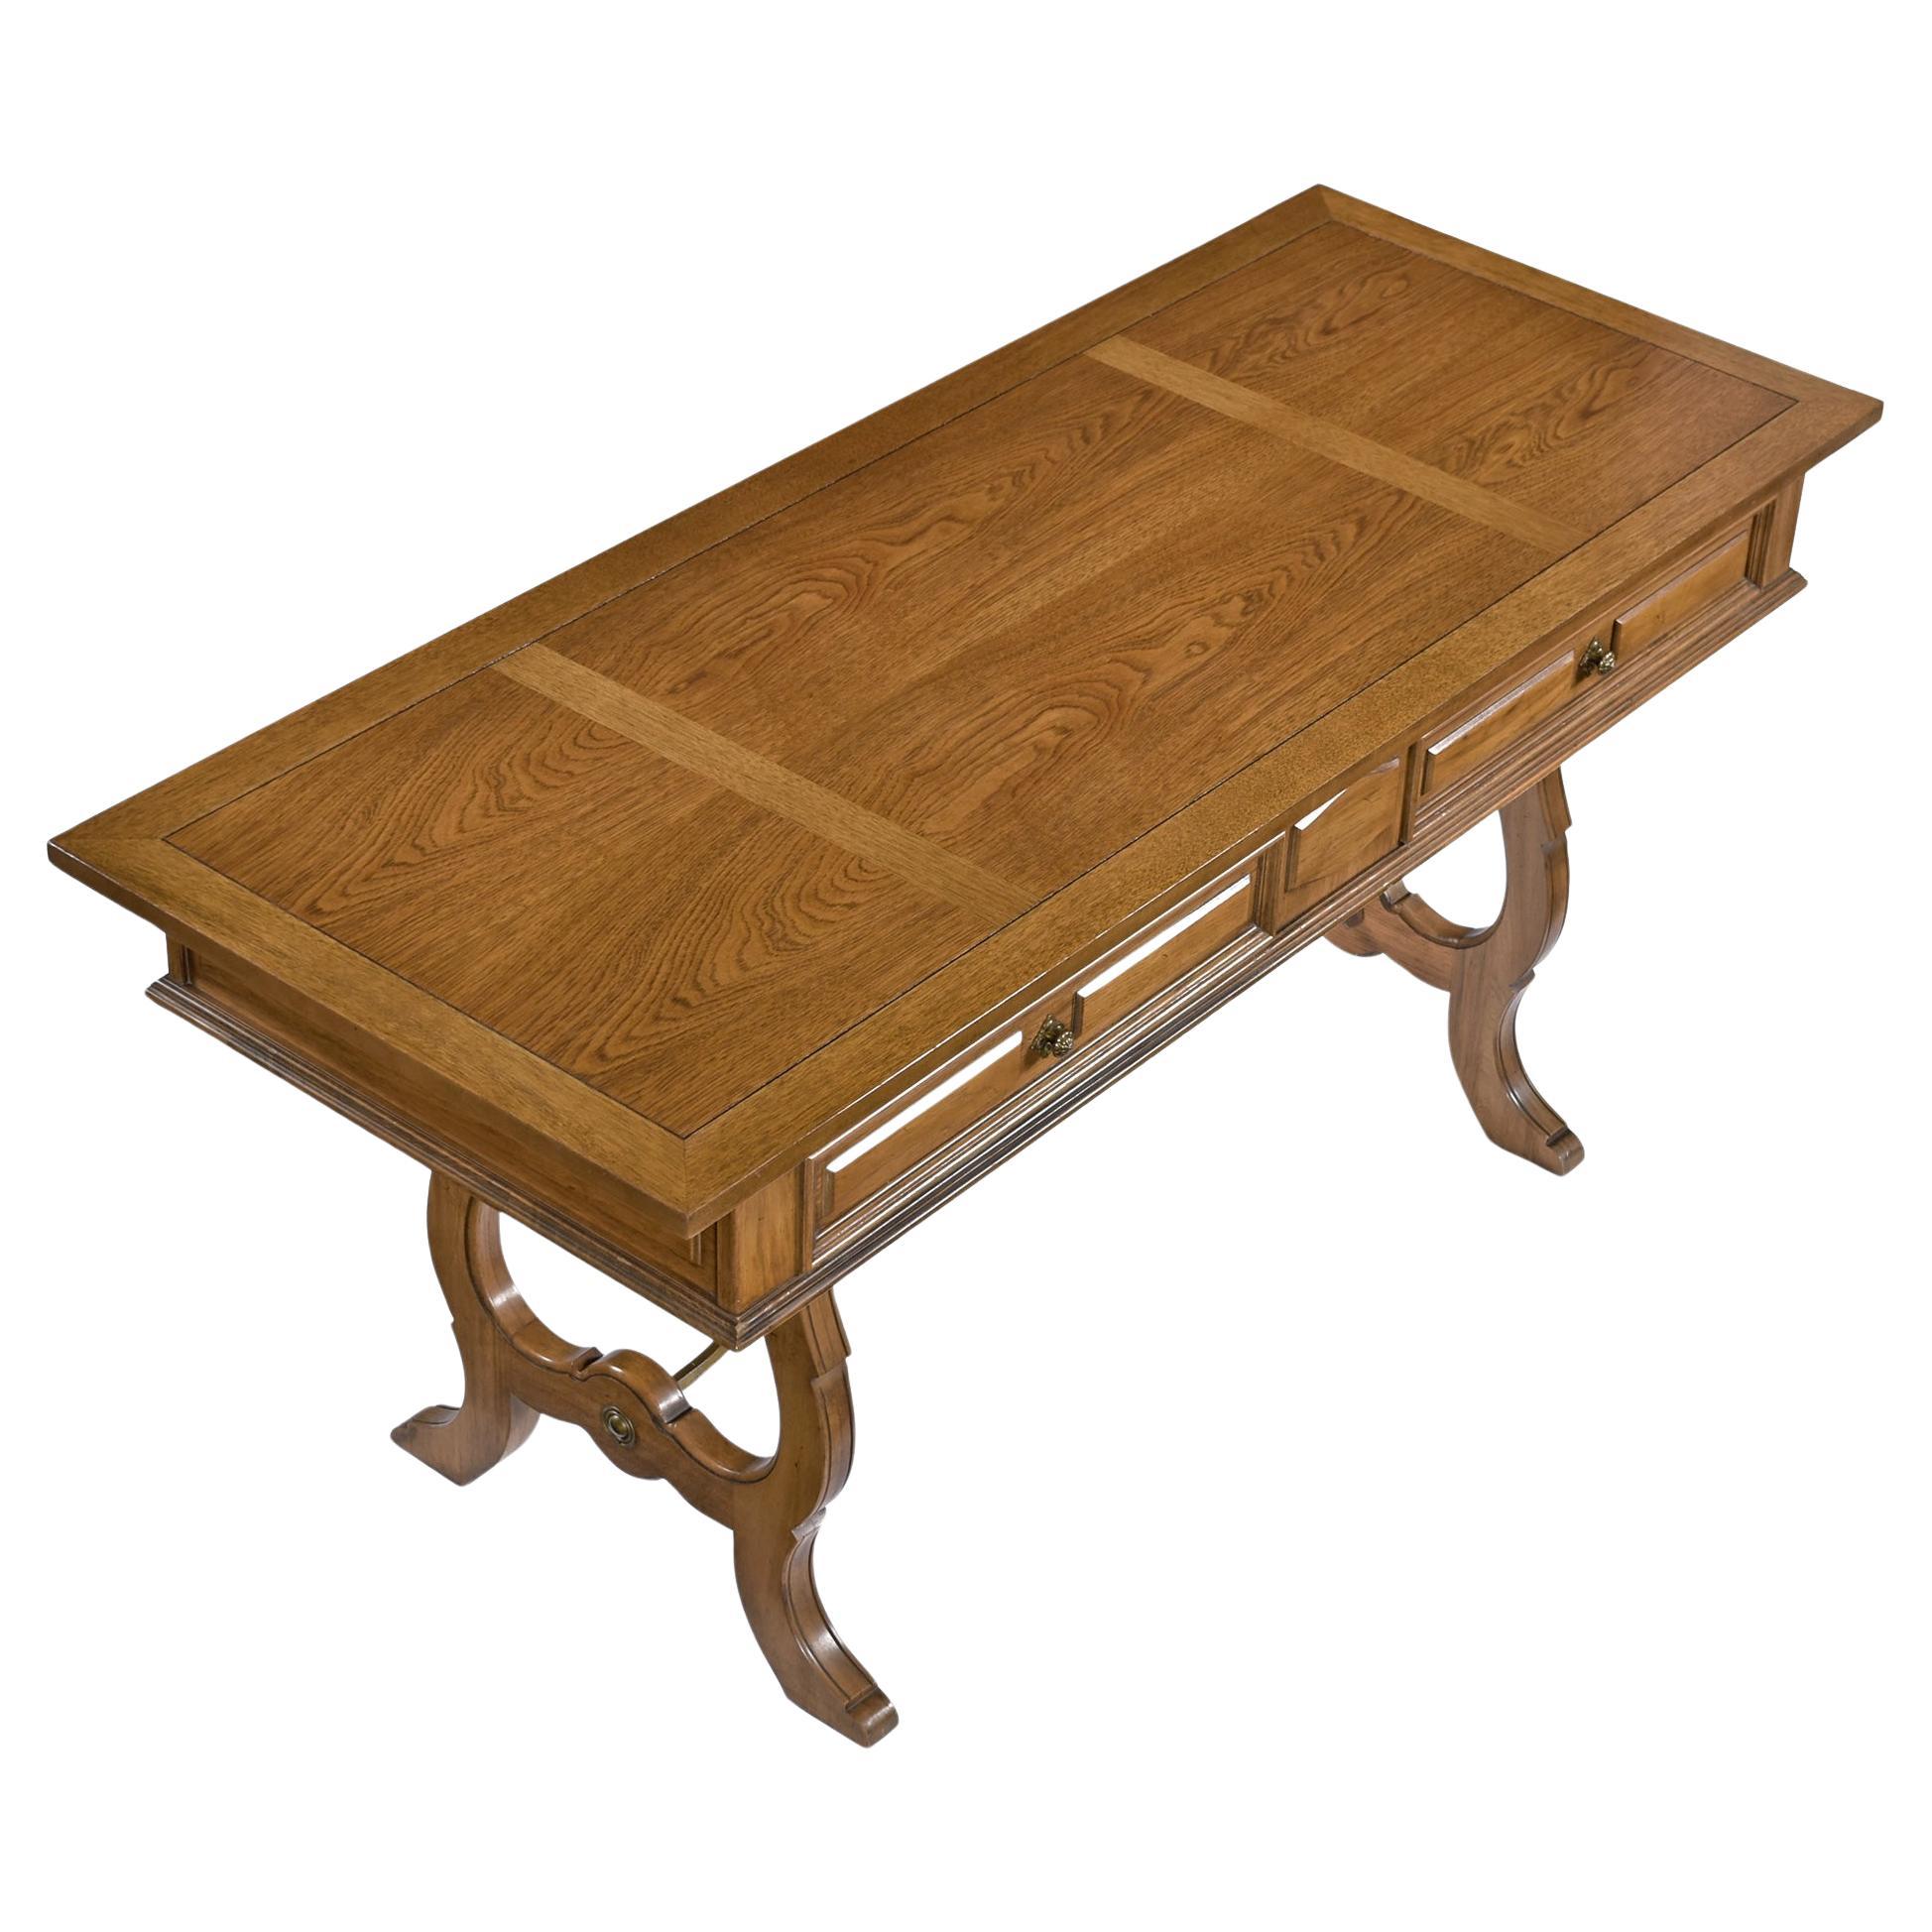 American 1960's English Regency Style Pecan Desk Console by Thomasville For Sale